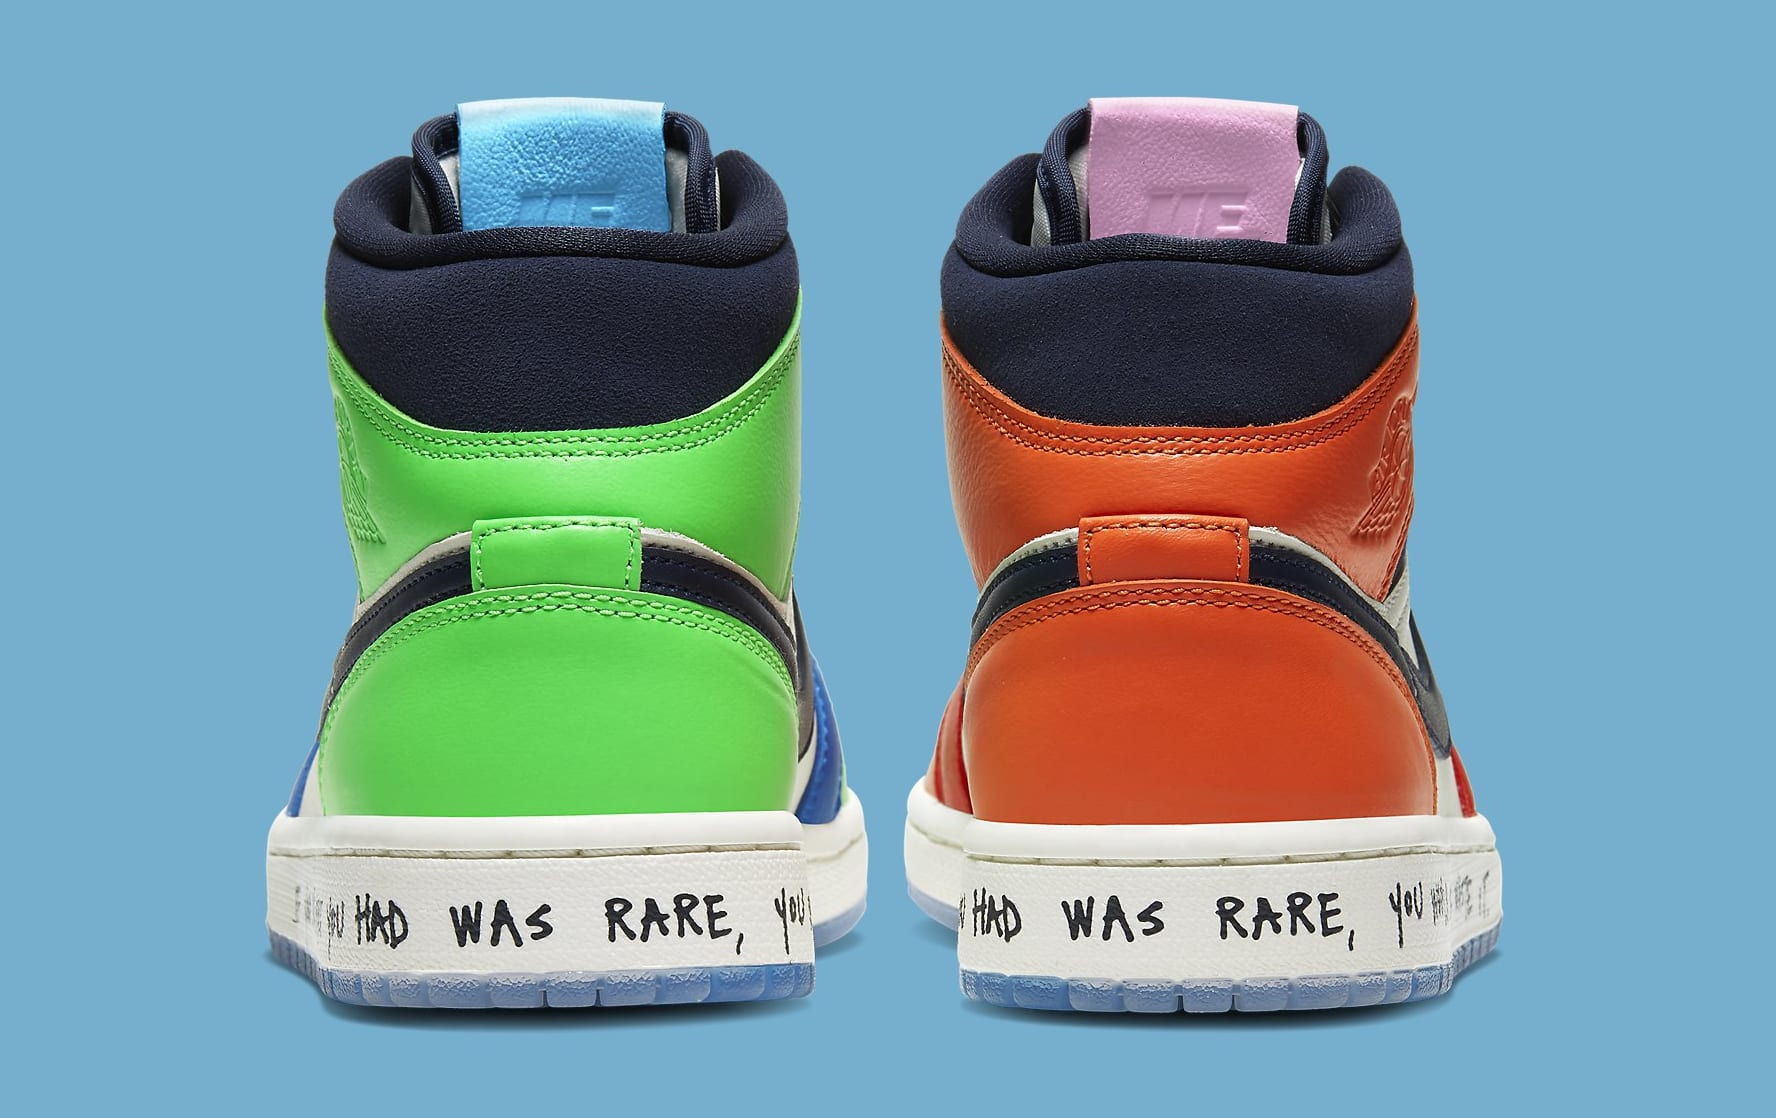 Melody Ehsani x Air Jordan 1 Mid Release Date Revealed: Official ...